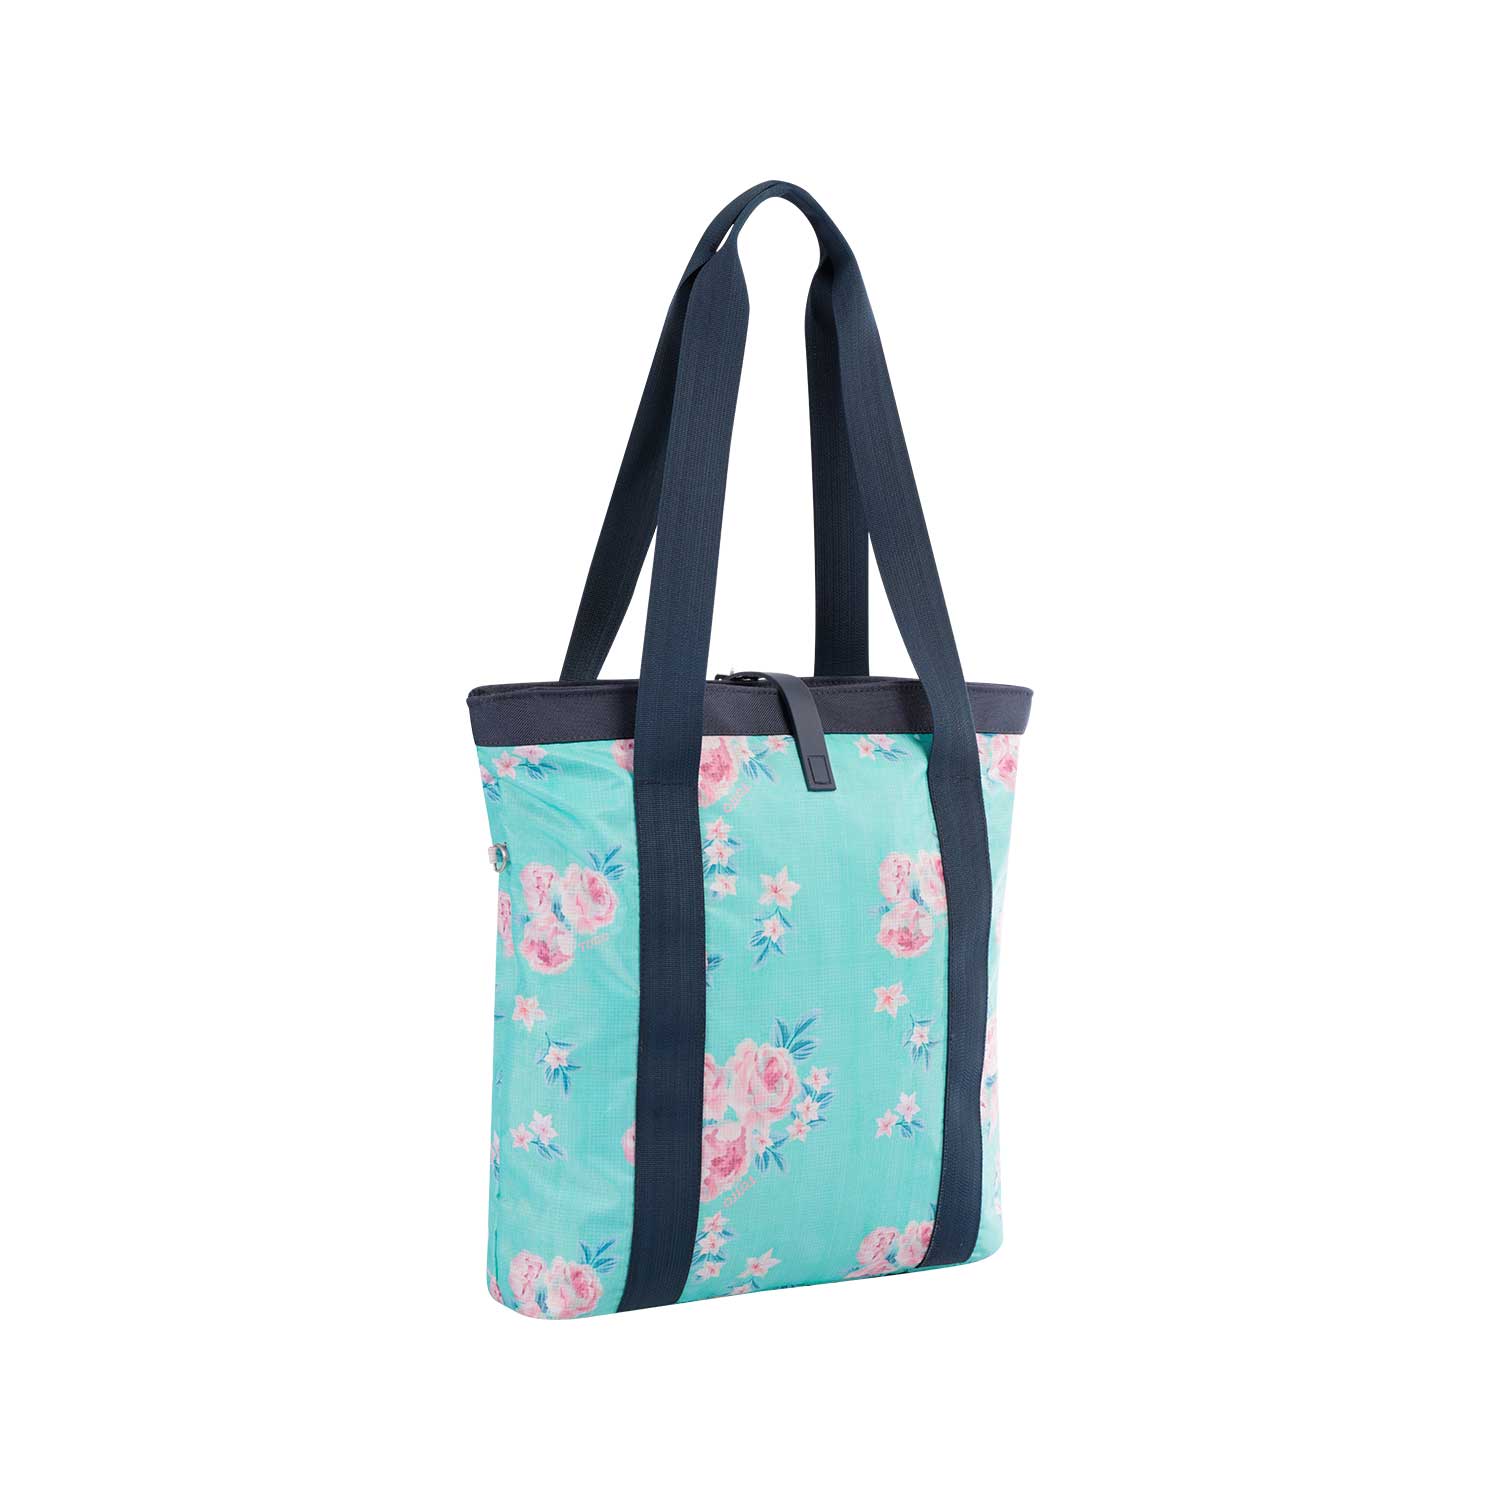 TOTTO BAG, LAPTOP BAG, TEAL/FLOWER | Bahamas Office and School Supplies